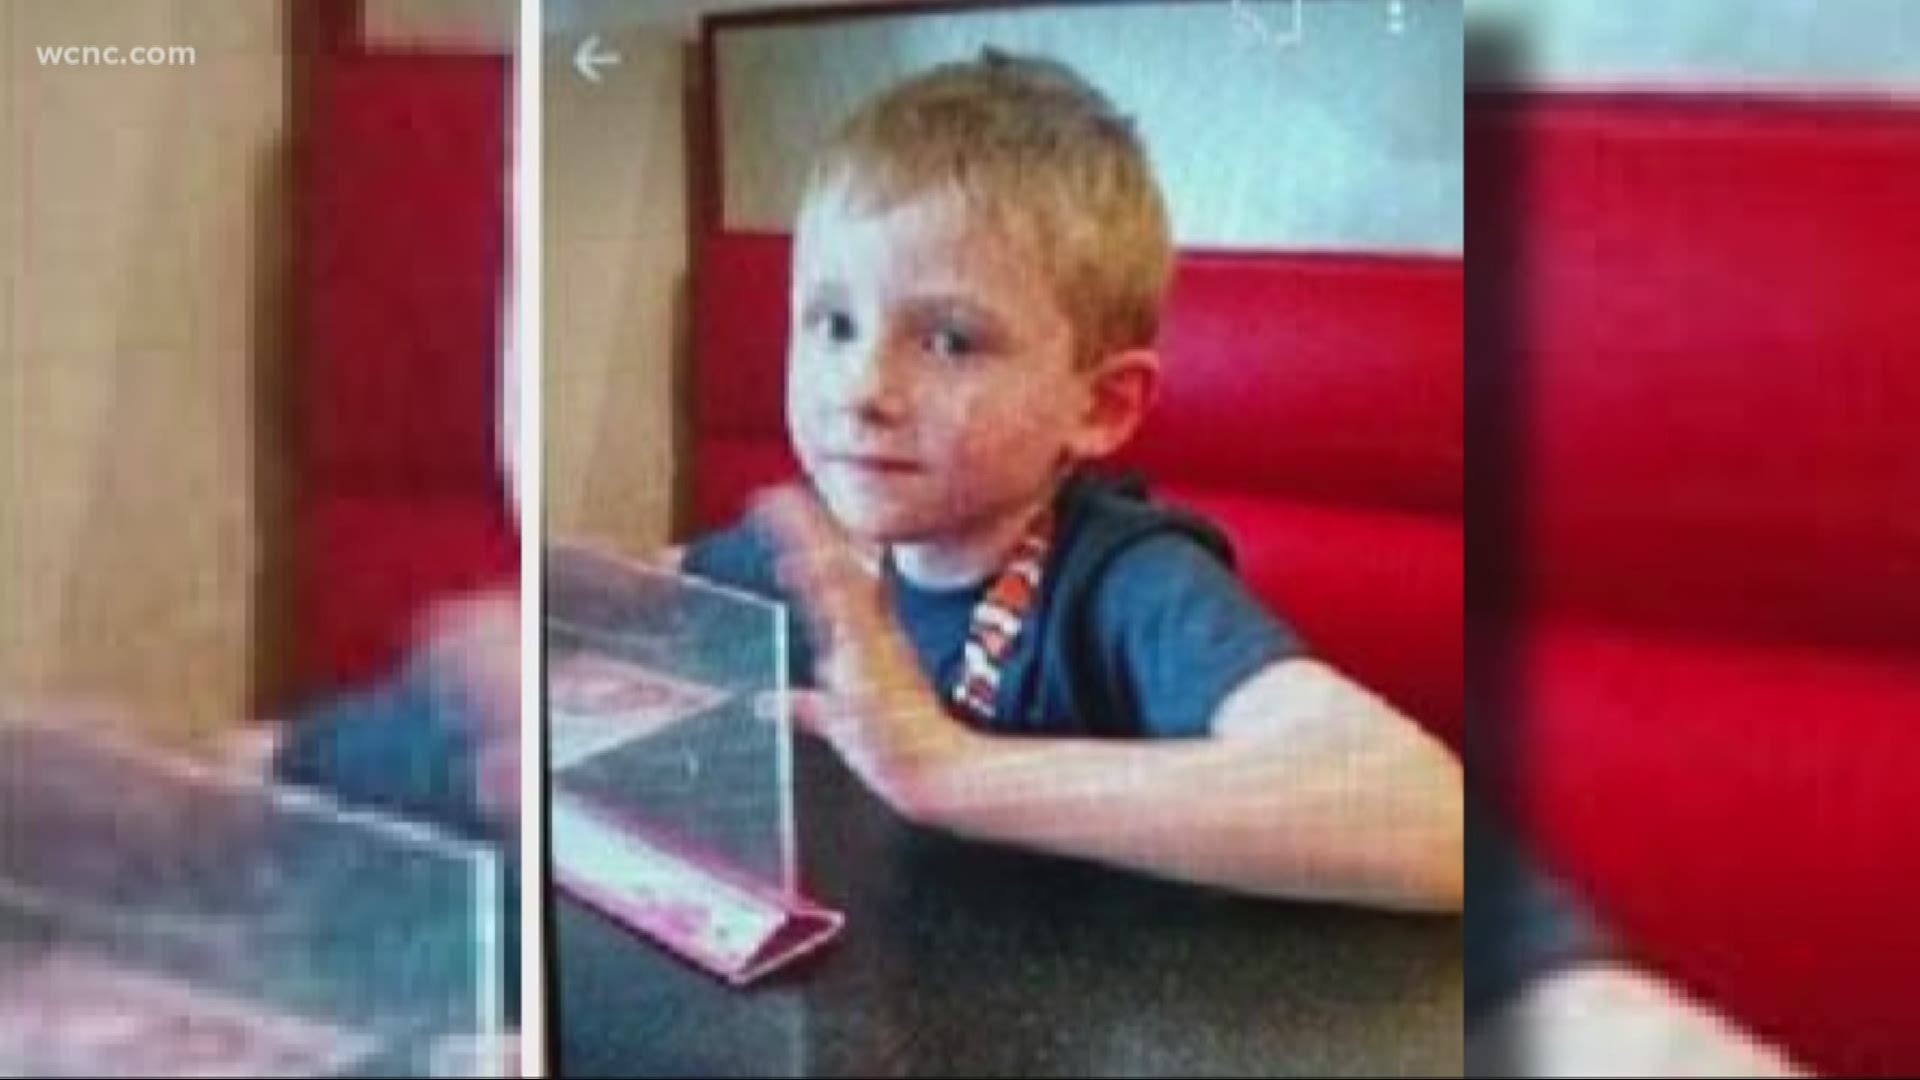 The coroner confirmed Monday that the body found in a creek about a mile from where Maddox Ritch went missing was indeed that of the missing 6-year-old.